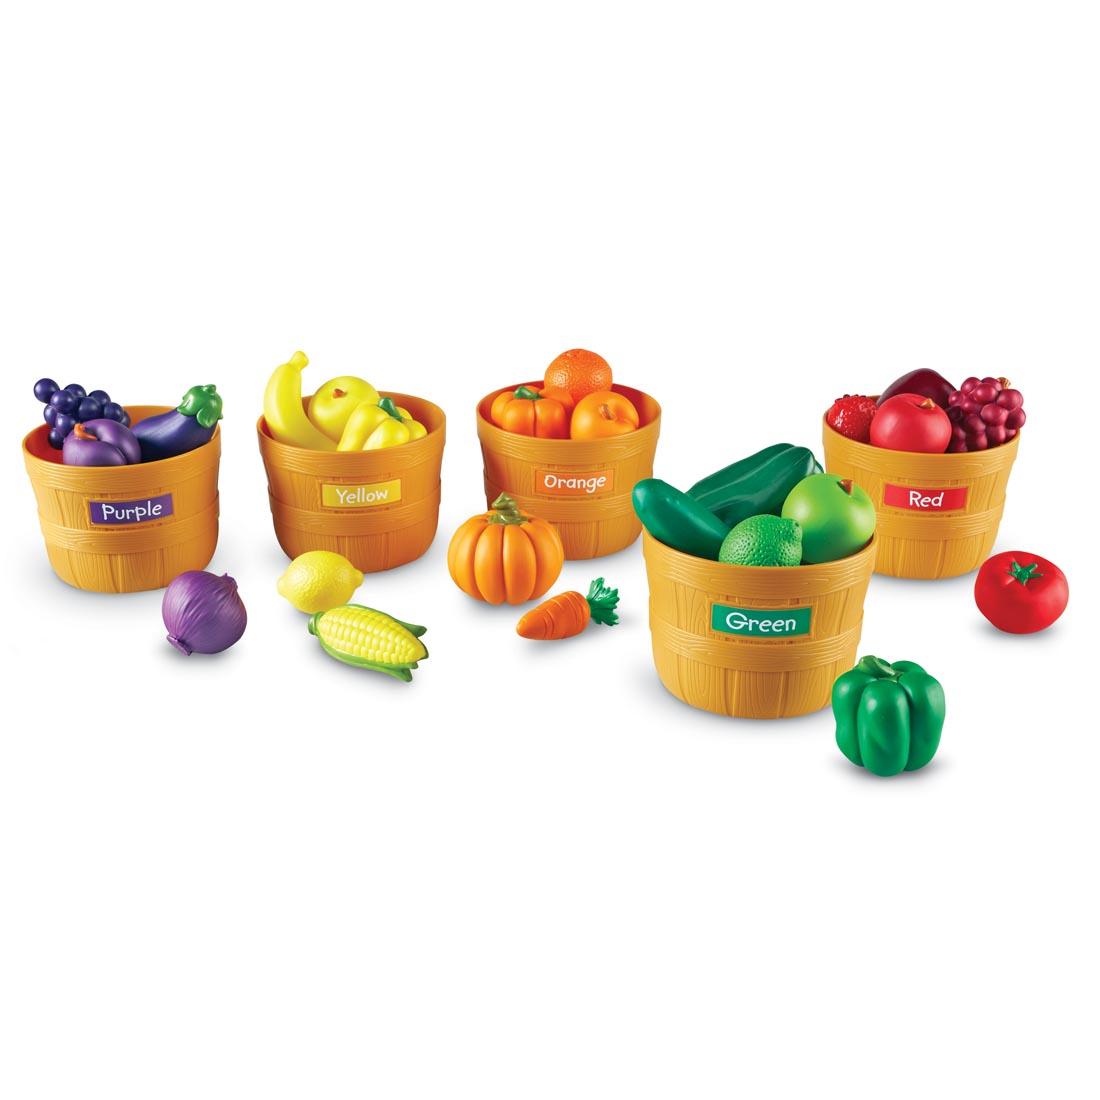 sorting set with colorful plastic fruits and vegetables in baskets